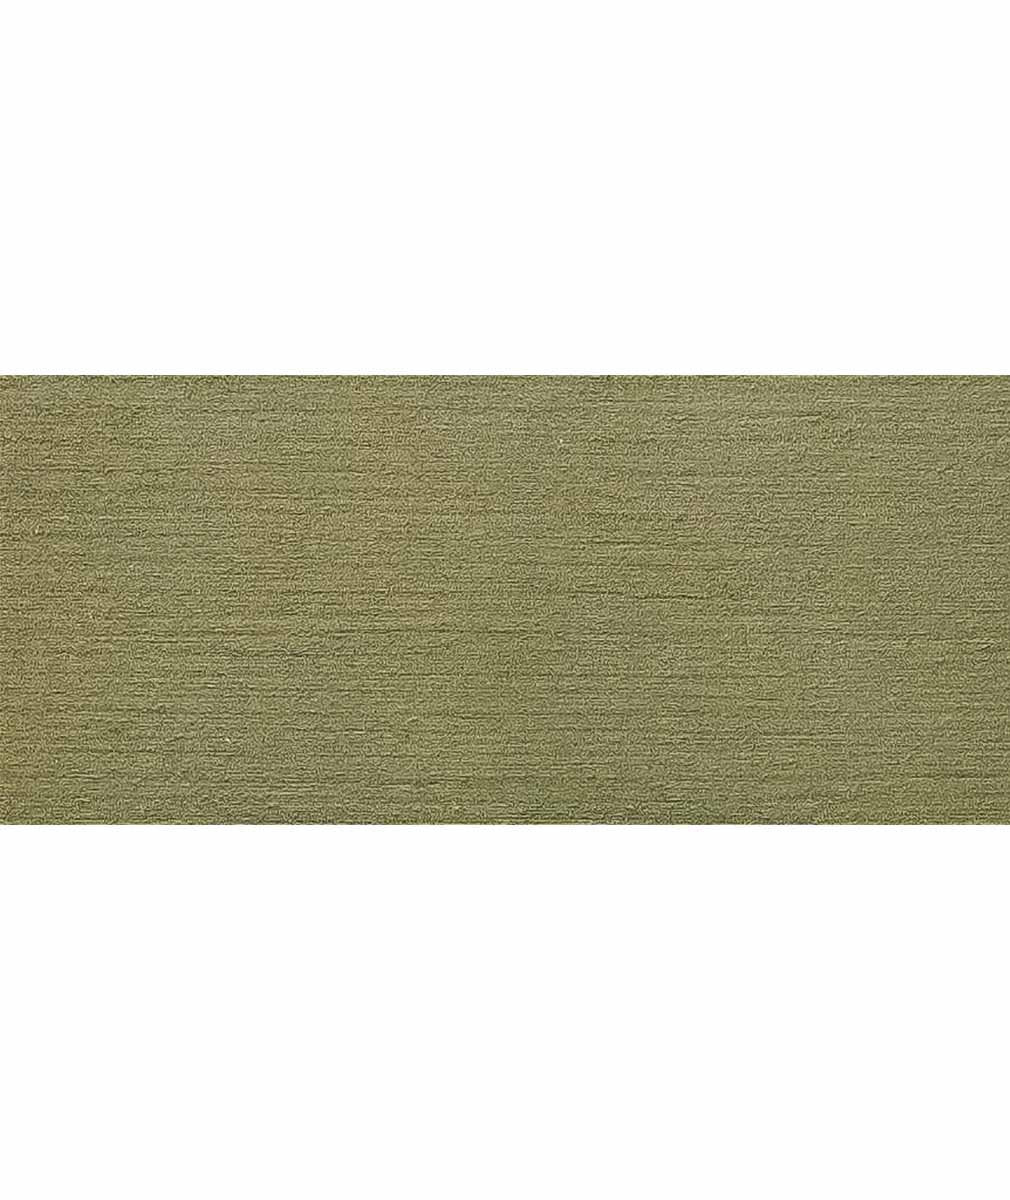 Shop Benjamin Moore&#39;s Rosepine Arborcoat Semi-Solid Stain  from JC Licht